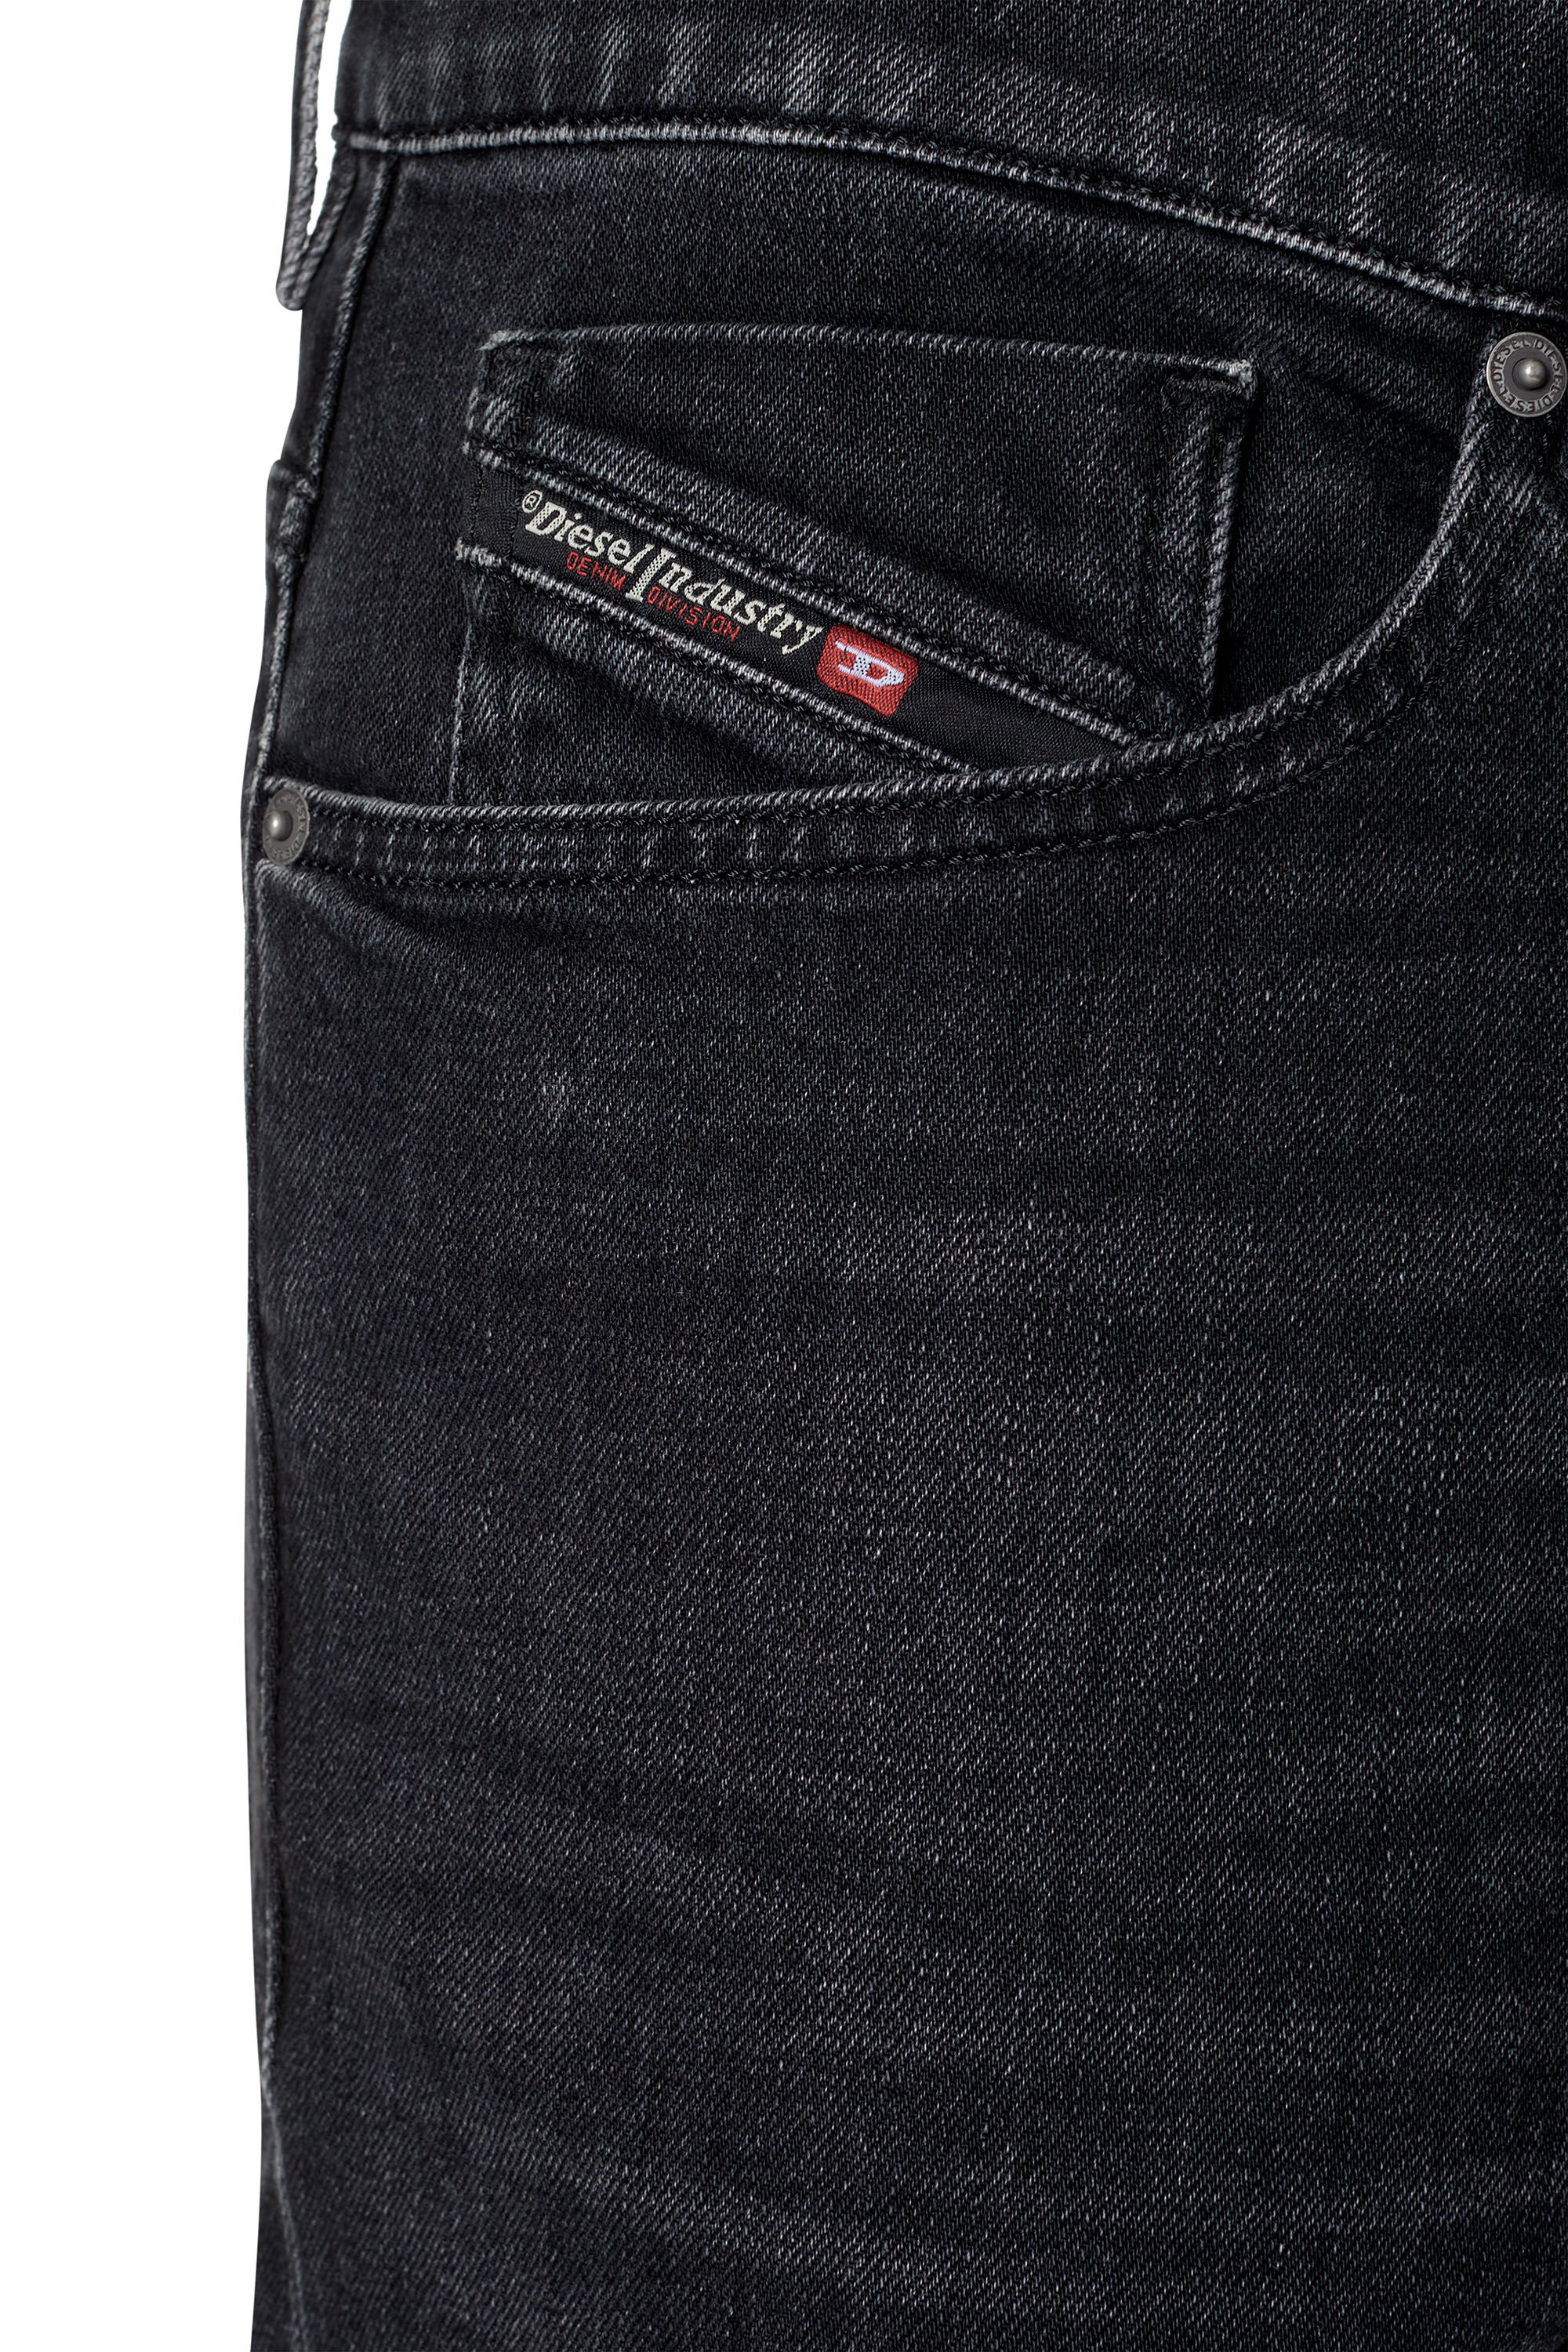 2005 D-Fining Tapered Jeans 09B83